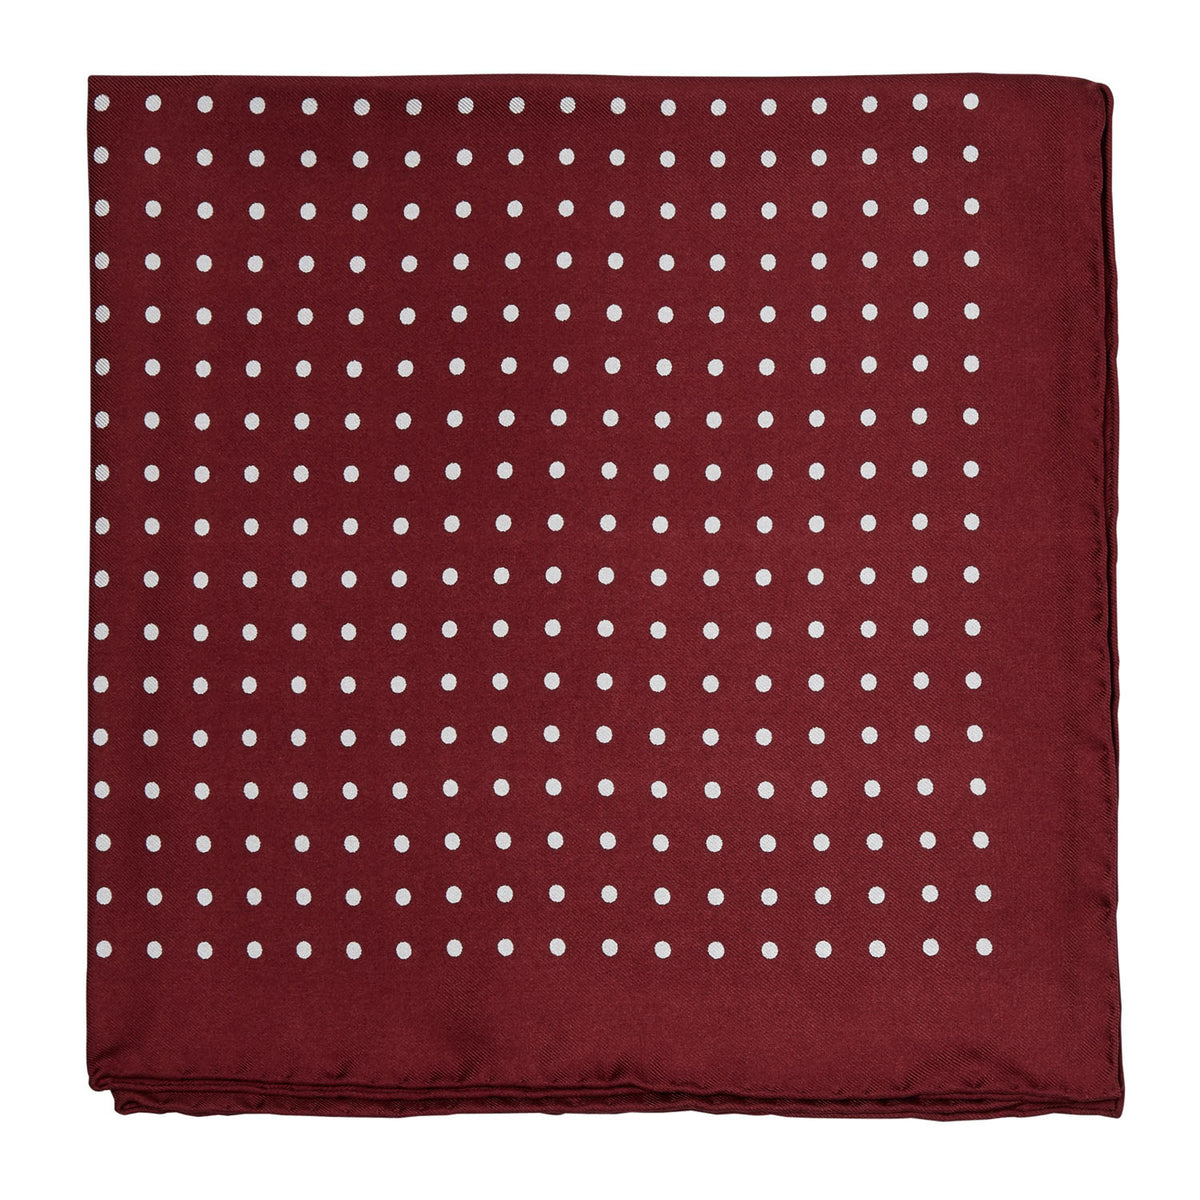 A formal Sovereign Grade 100% Silk Burgundy London Dot pocket square from KirbyAllison.com to enhance your outfit.